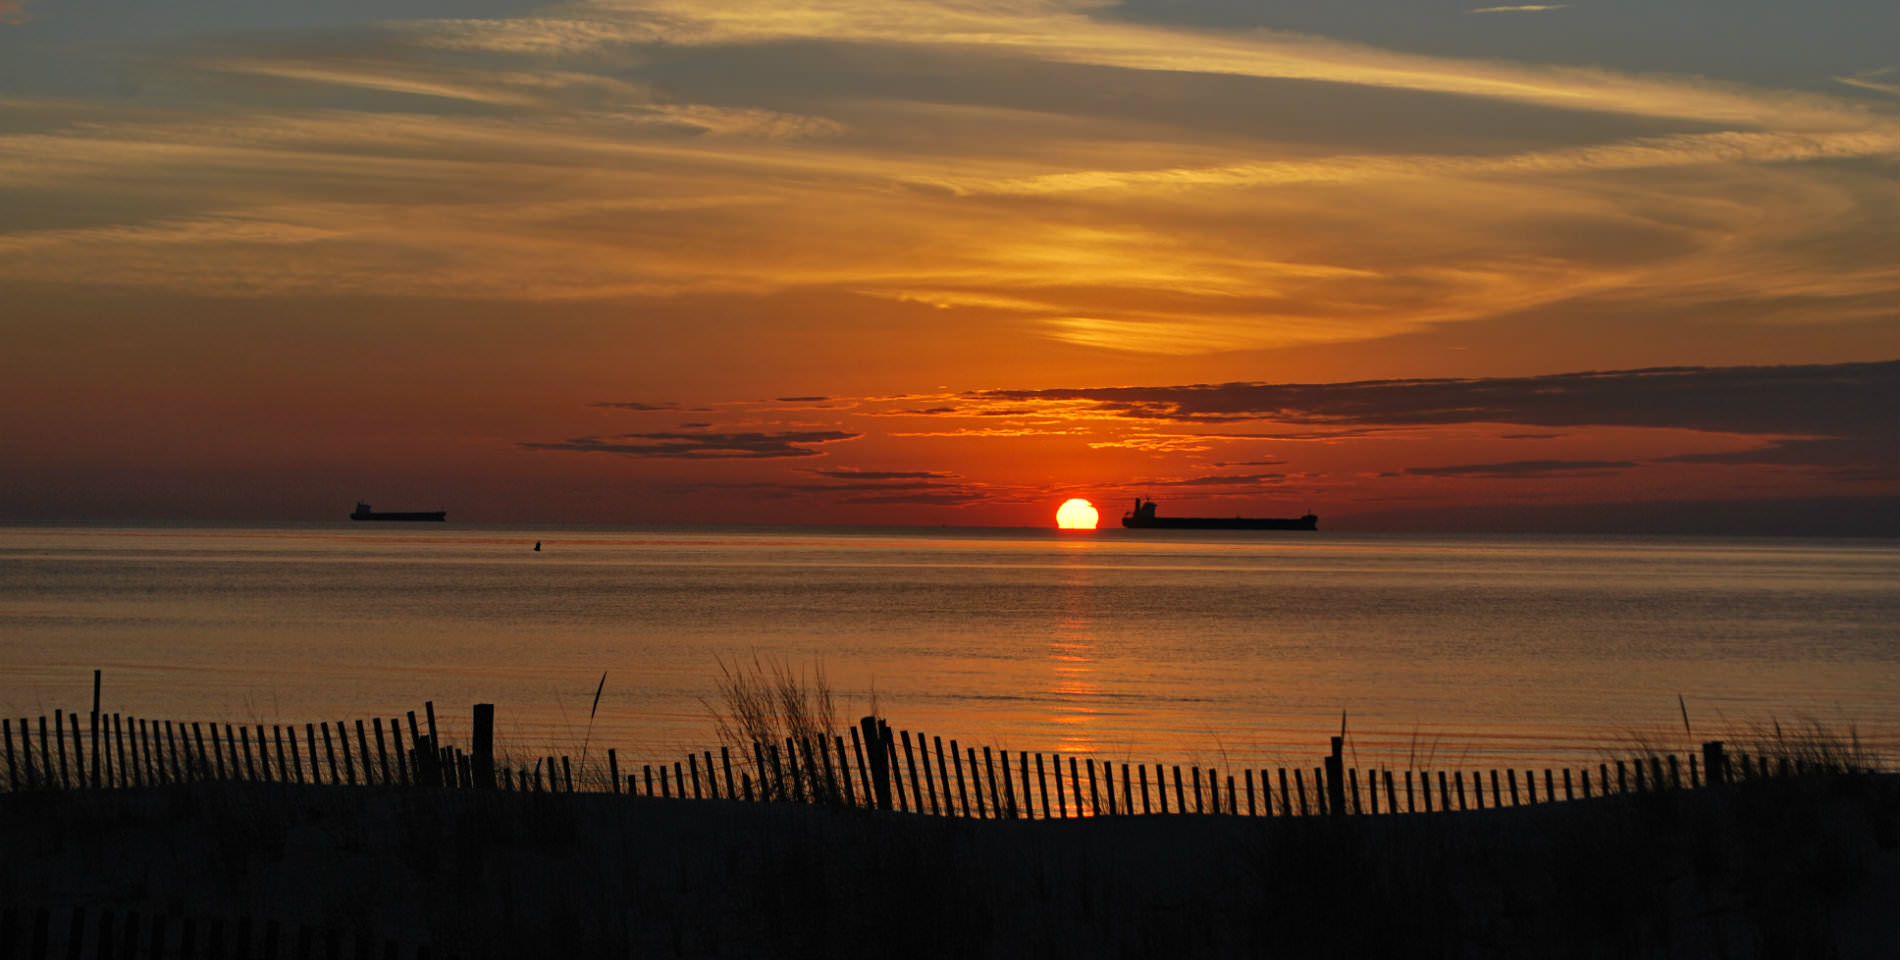 A yellow, orange and red sunset over the Bay with a wooden fence lined beach in the foreground. 